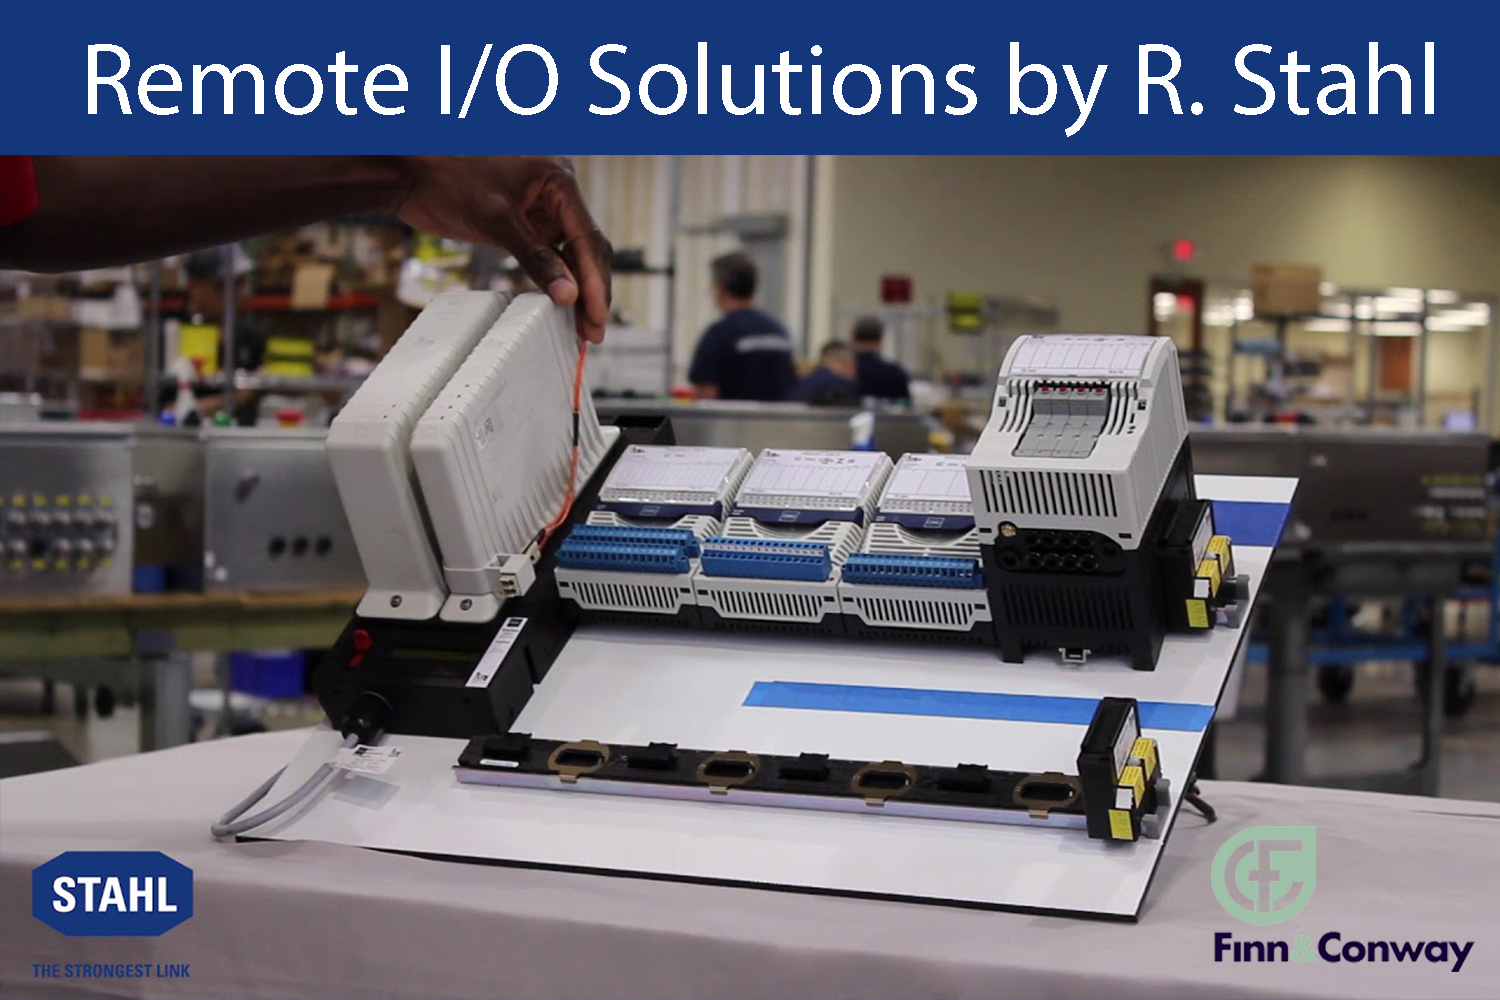 Remote I/O Solutions by R. STAHL